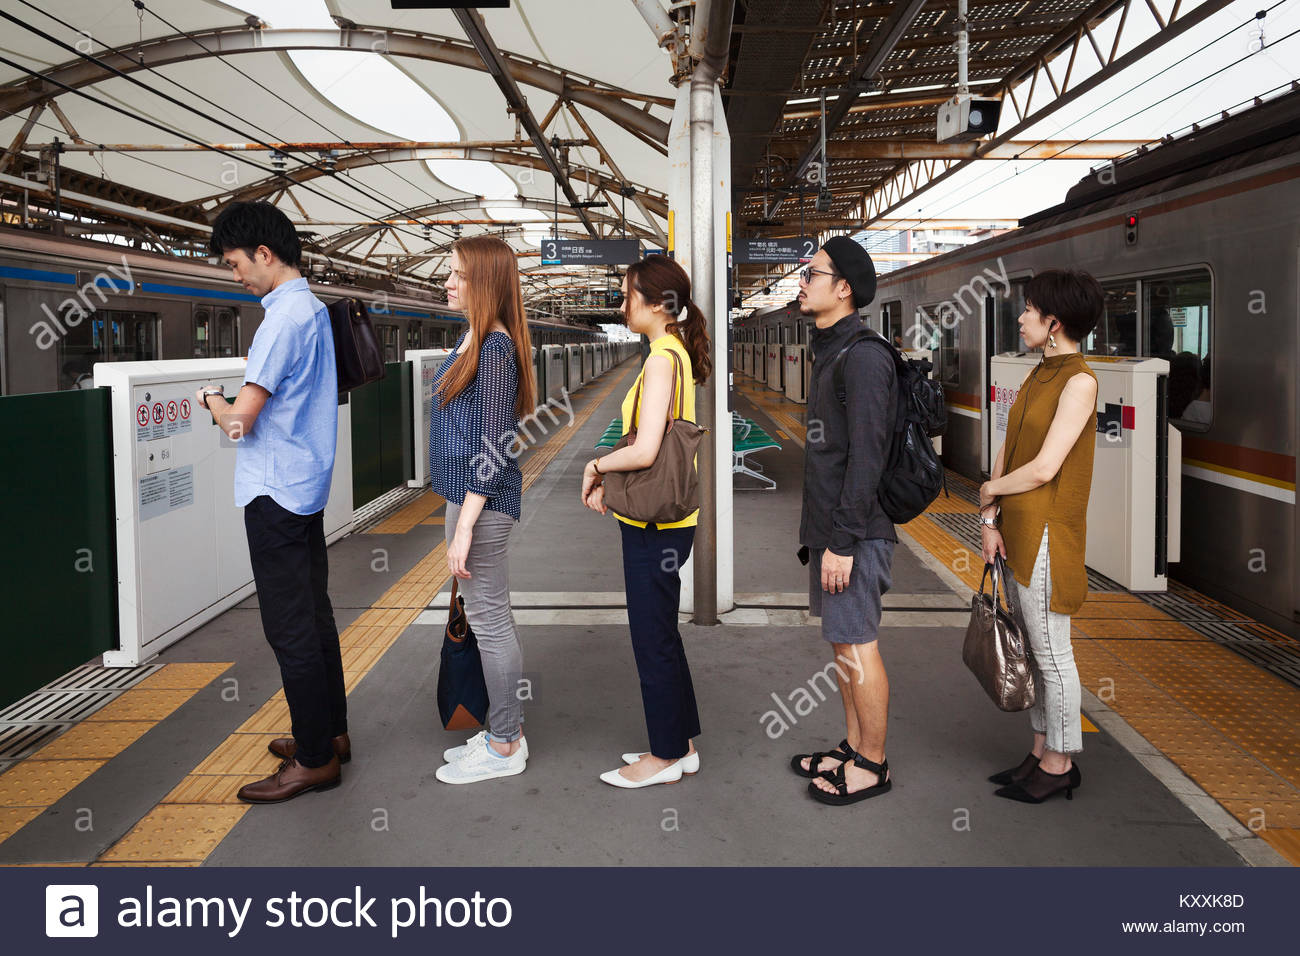 Pictured: Five People Standing in Line in a Stock Photo that I did not Care to Pay For.